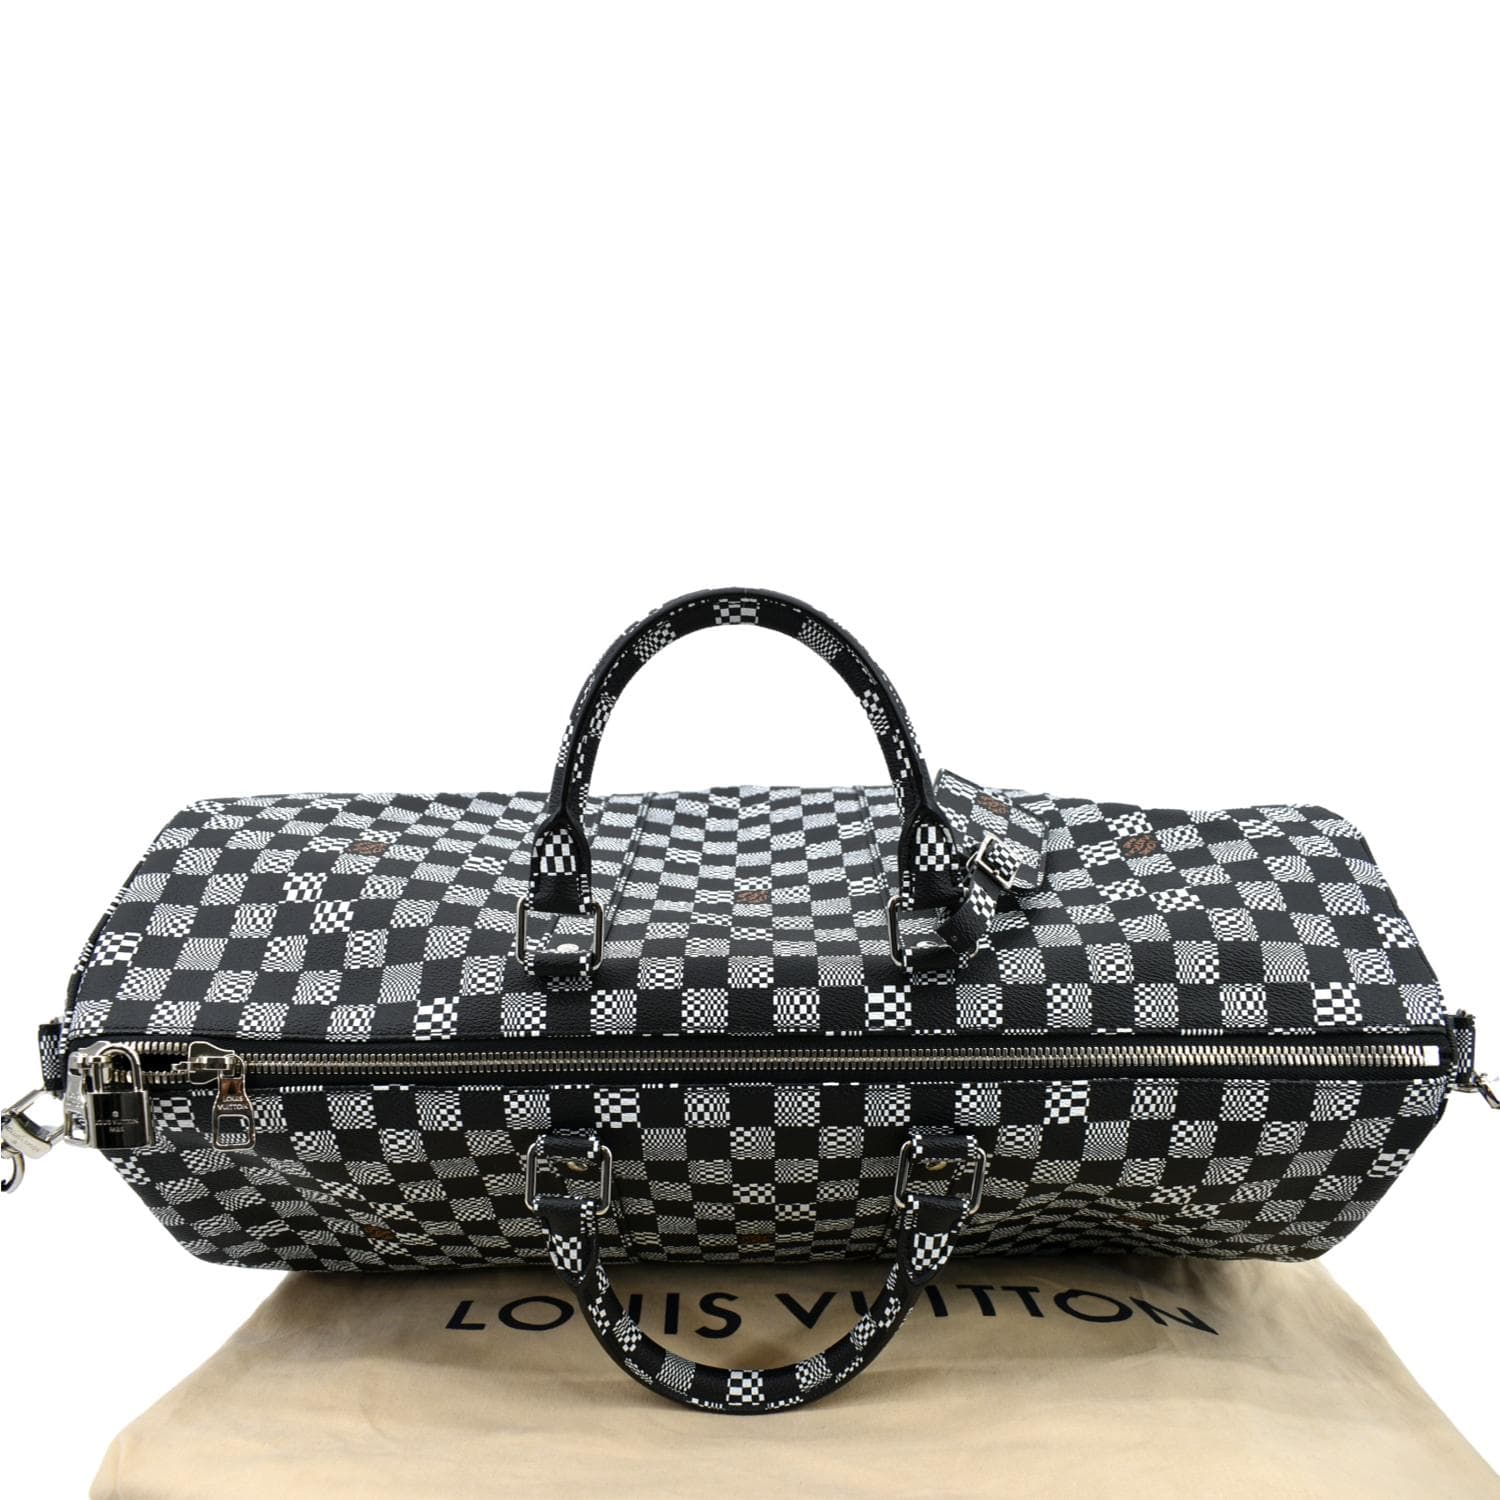 F is for Flight Risk: Why I Will Never Own a Louis Vuitton Keepall